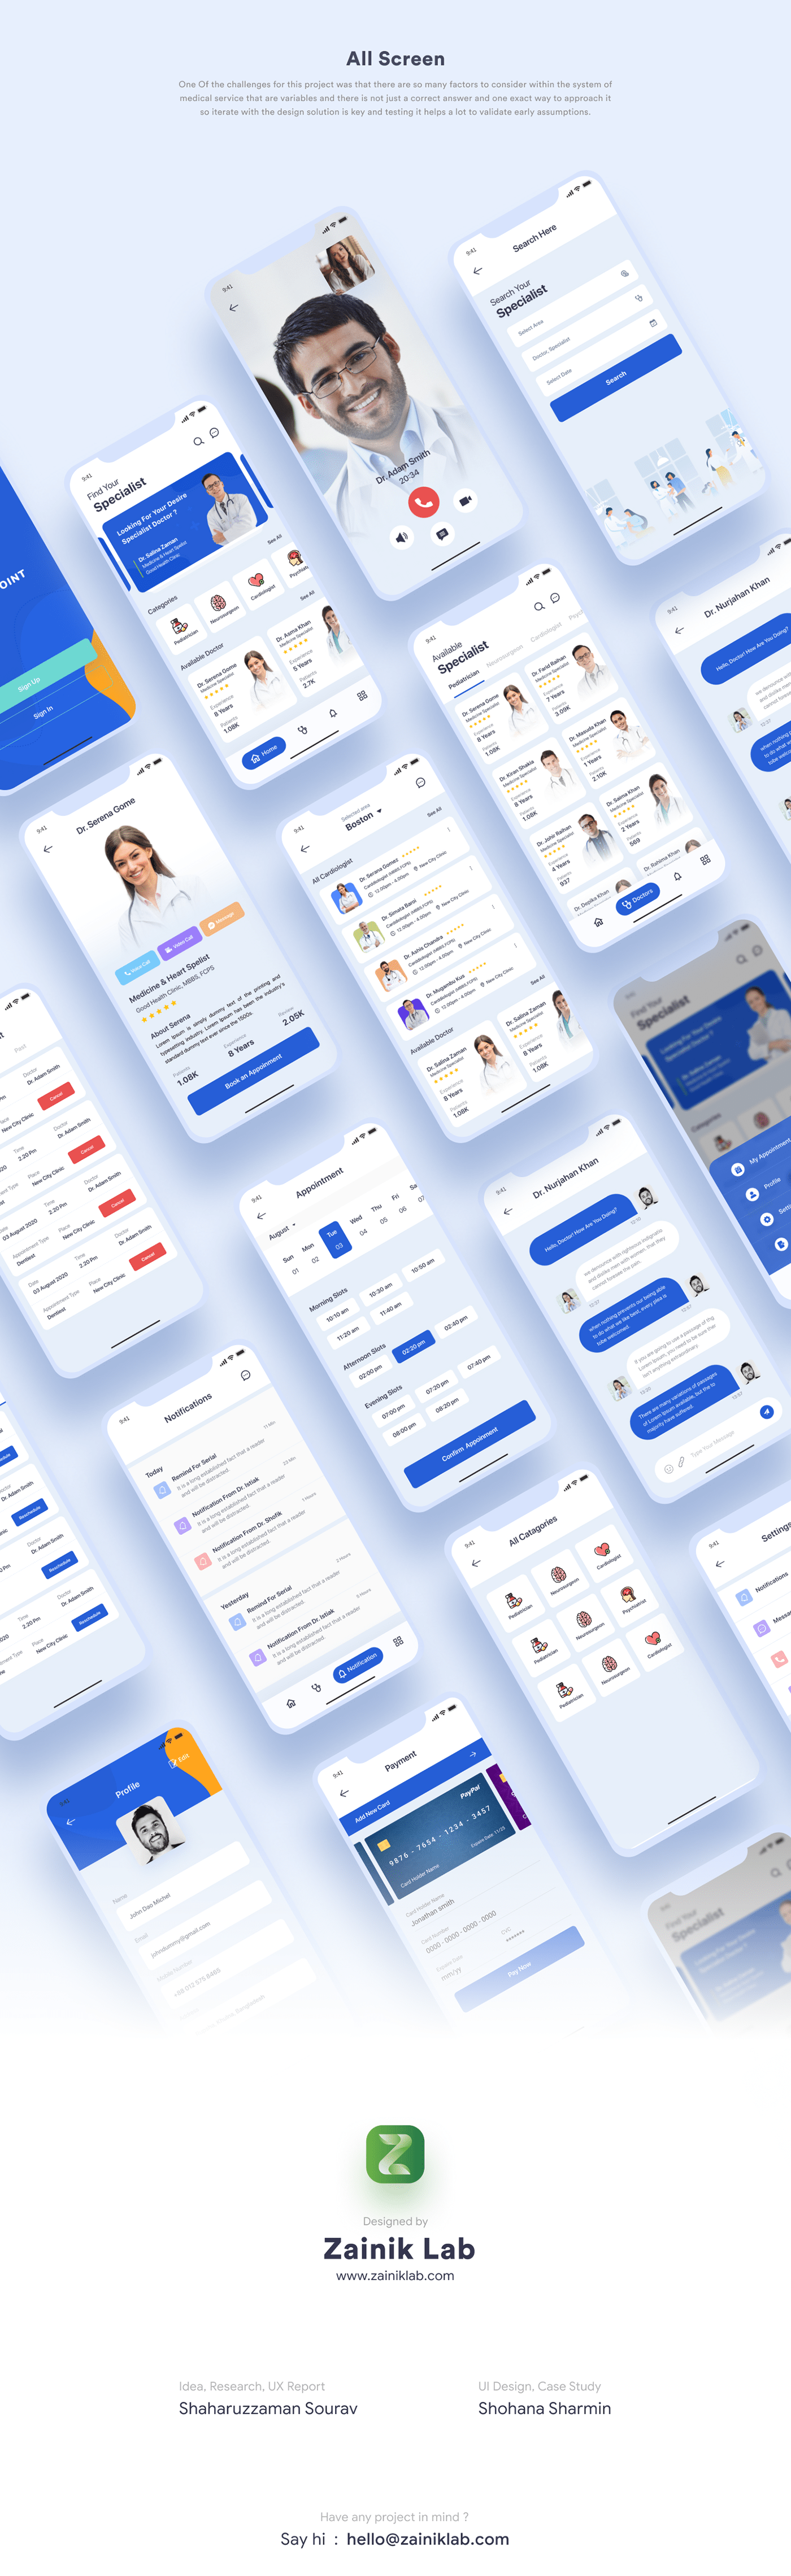 animation  Appointment app Case Study doctor app doctor point iOS App Medical app Payment App ui design UX Case Study